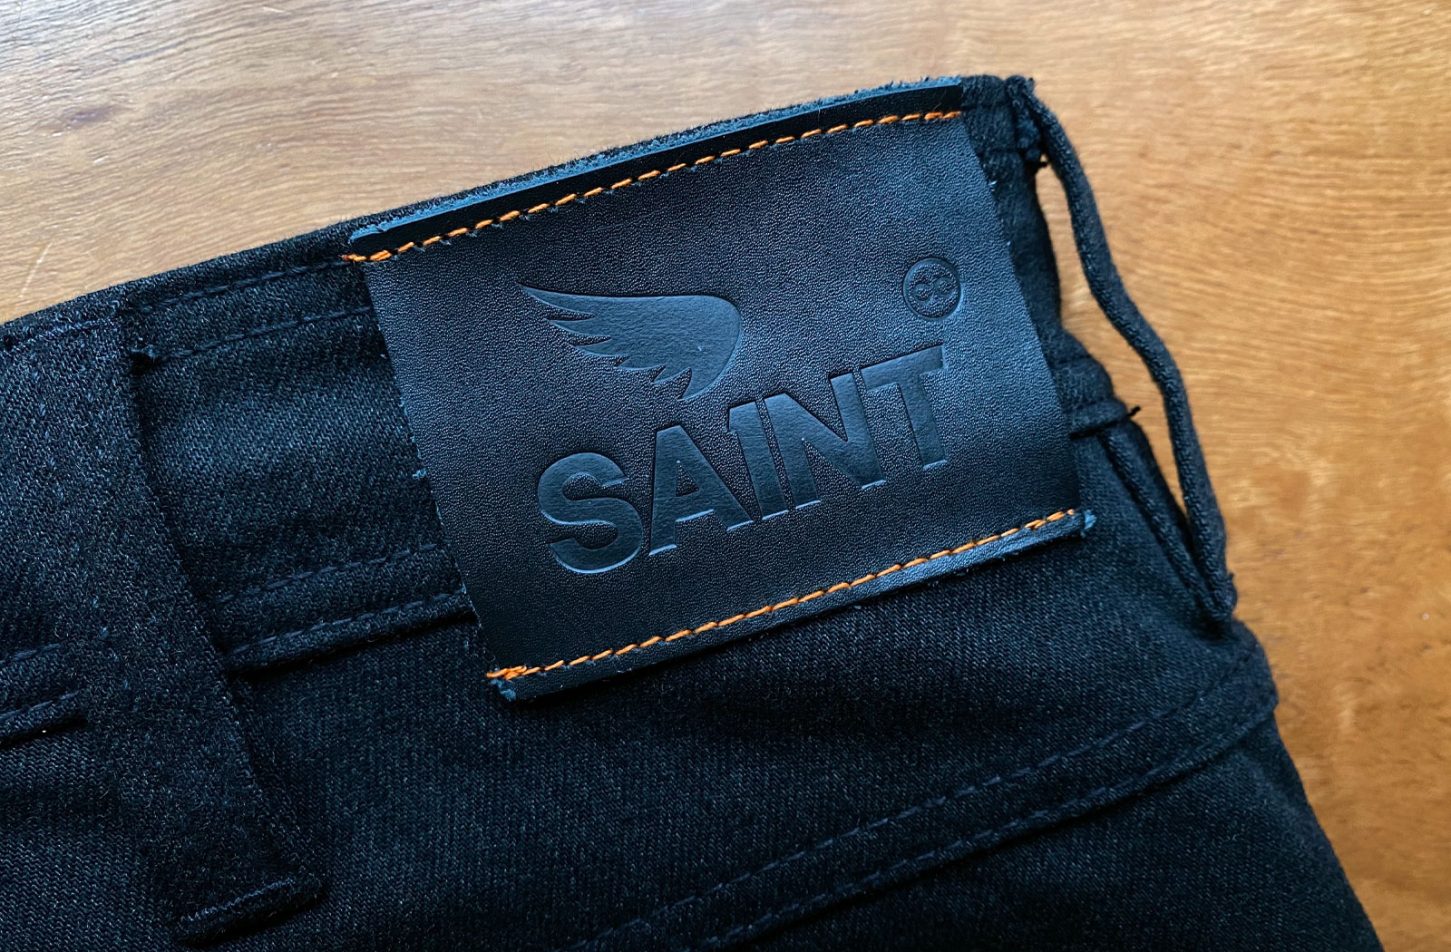 Gear Review: Saint Engineered Armoured Motorcycle Jeans - Return of the ...